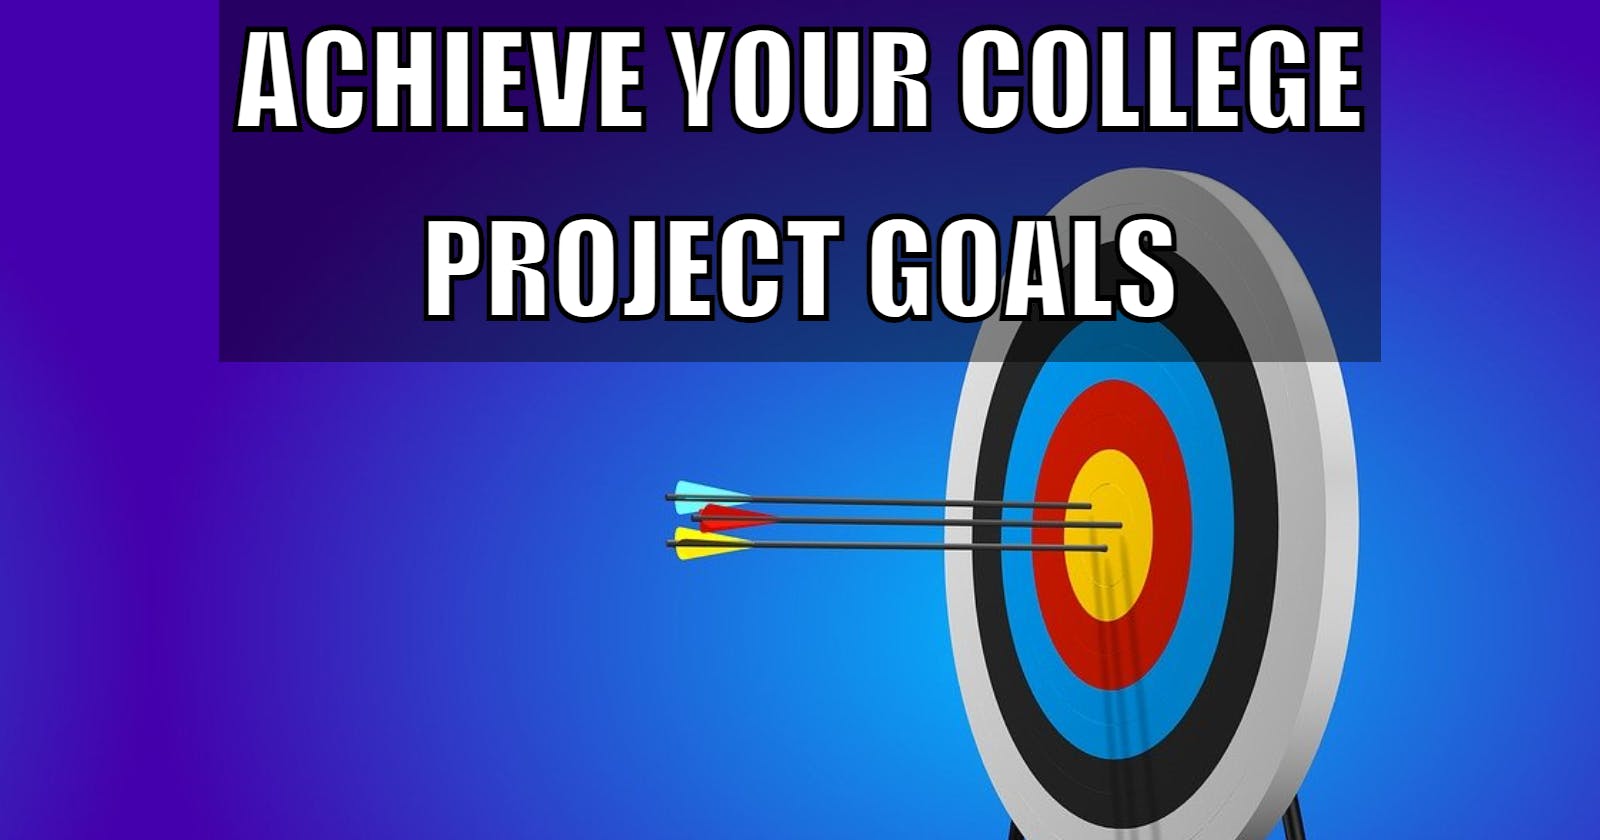 Achieve Your College Project Goals